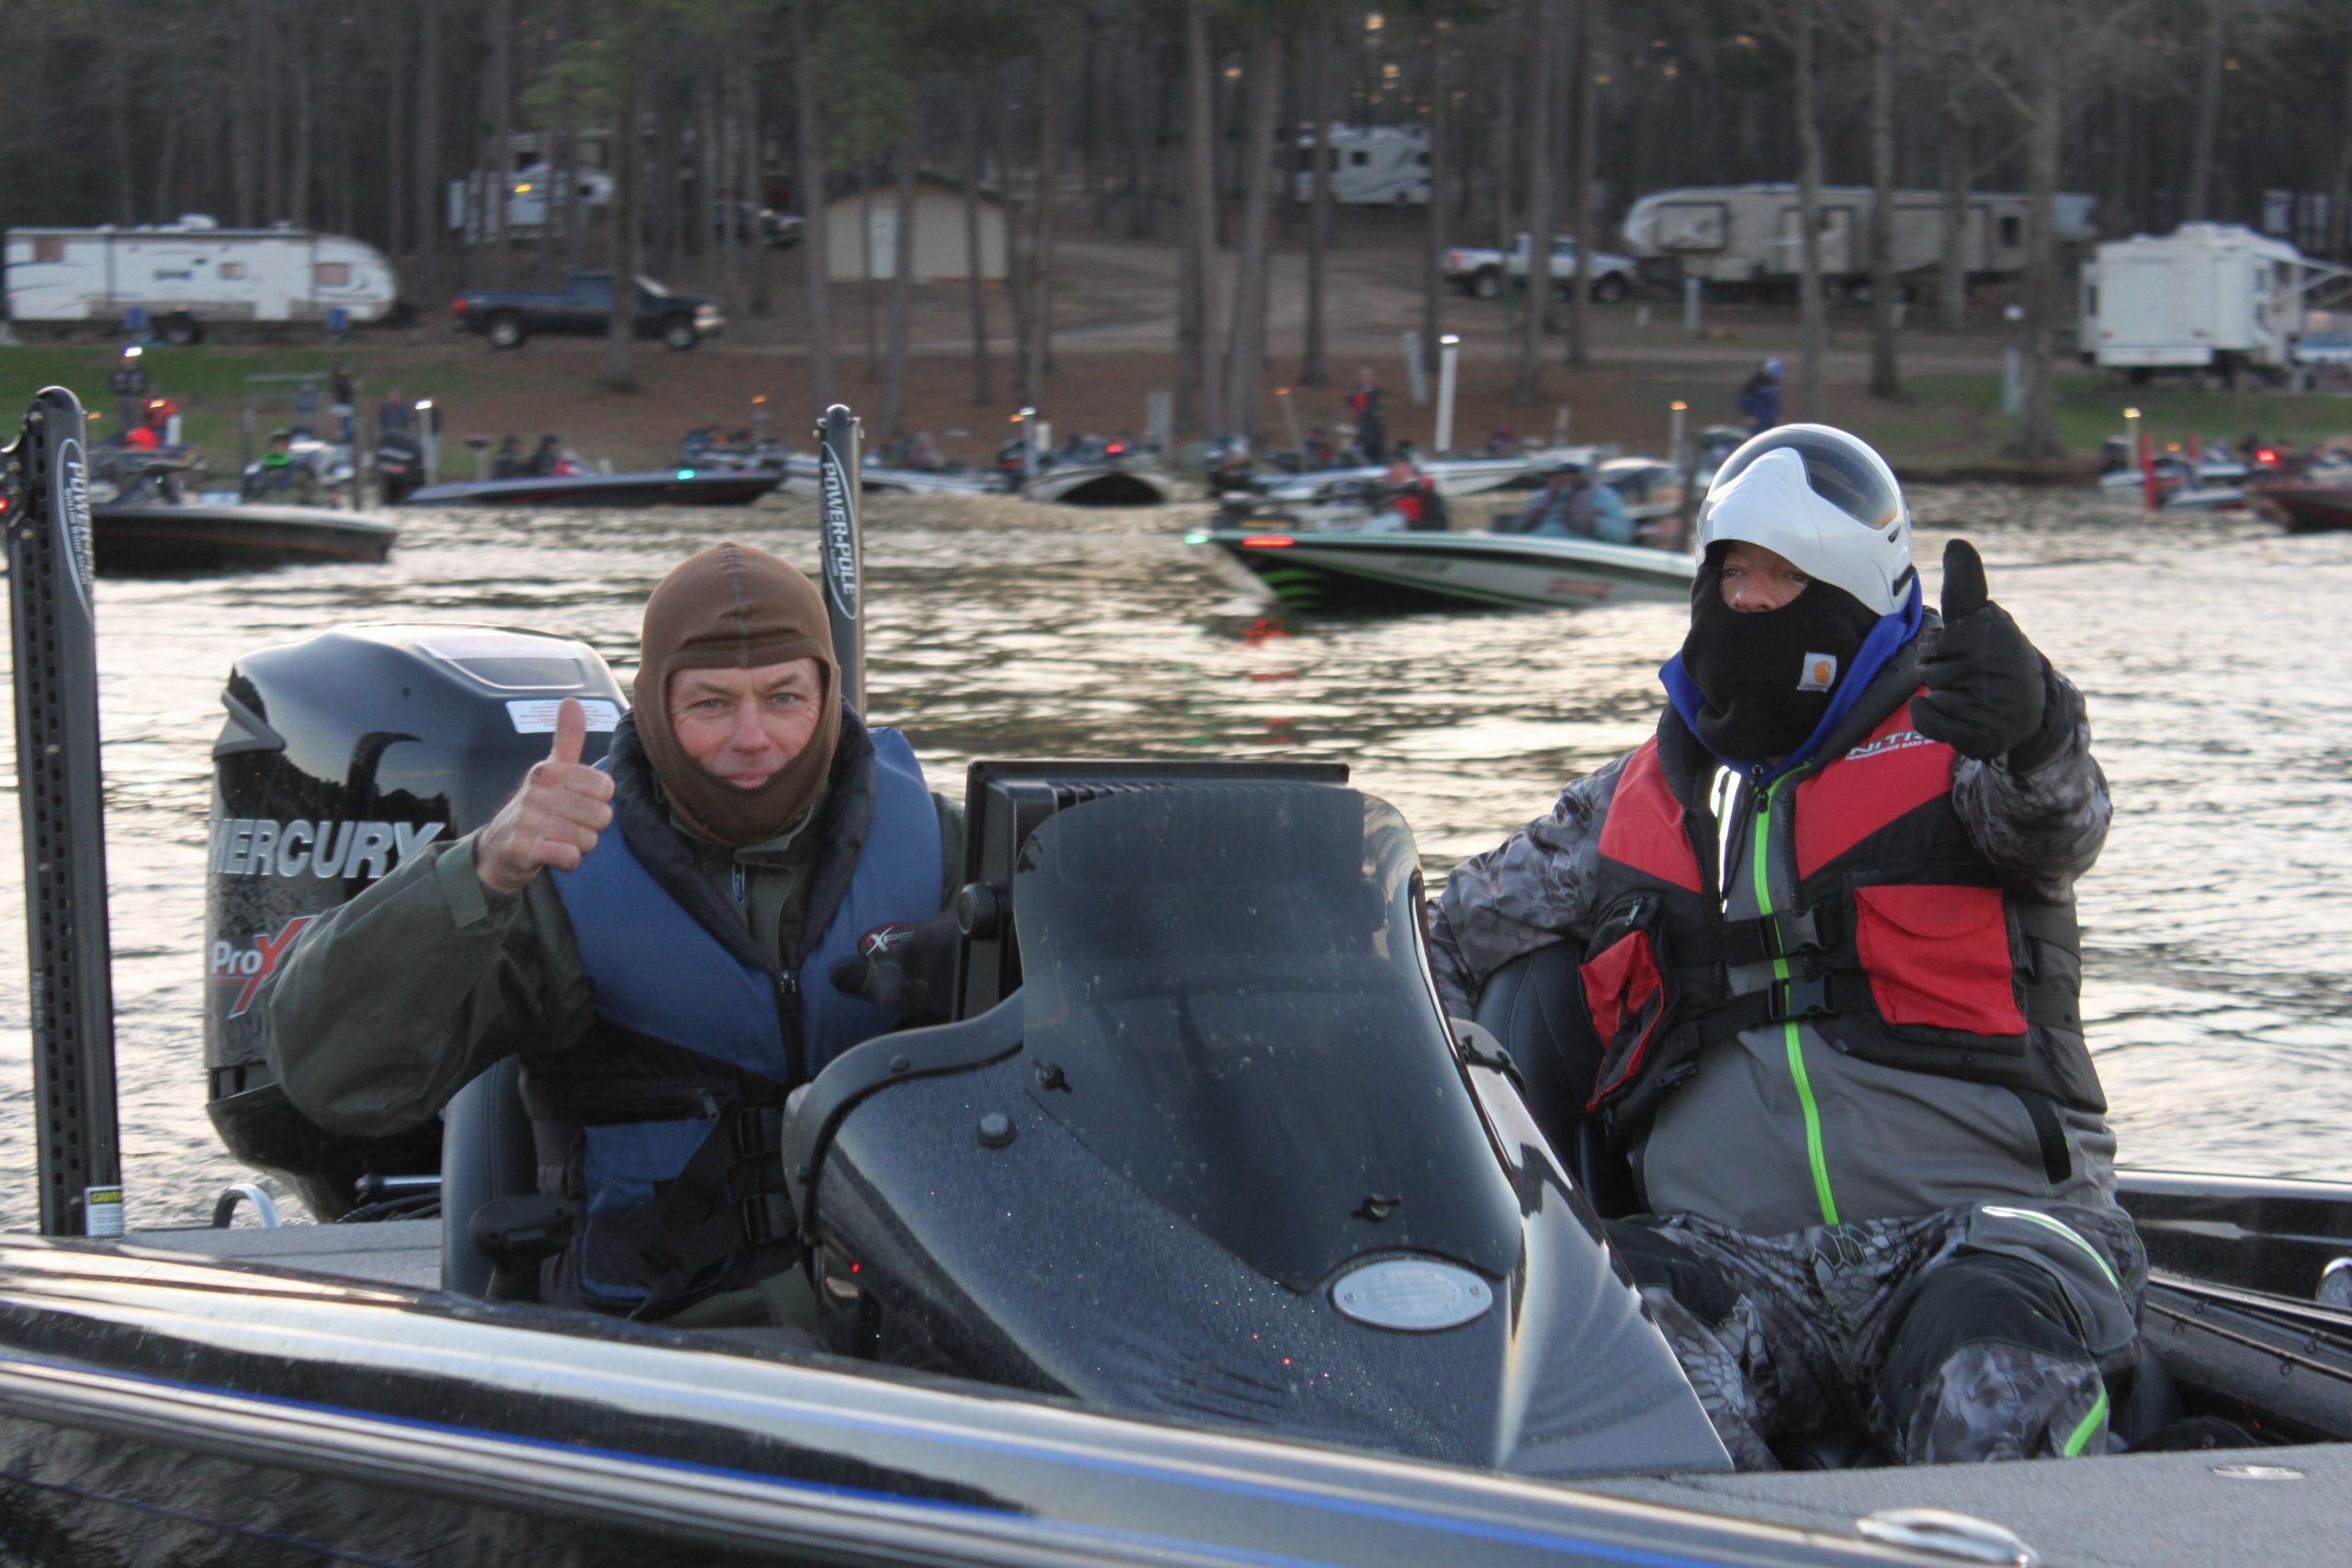 As do Keith Pace of Arkansas and David Patterson of Mississippi as they signal thumbs up on their way out to the reservoir.